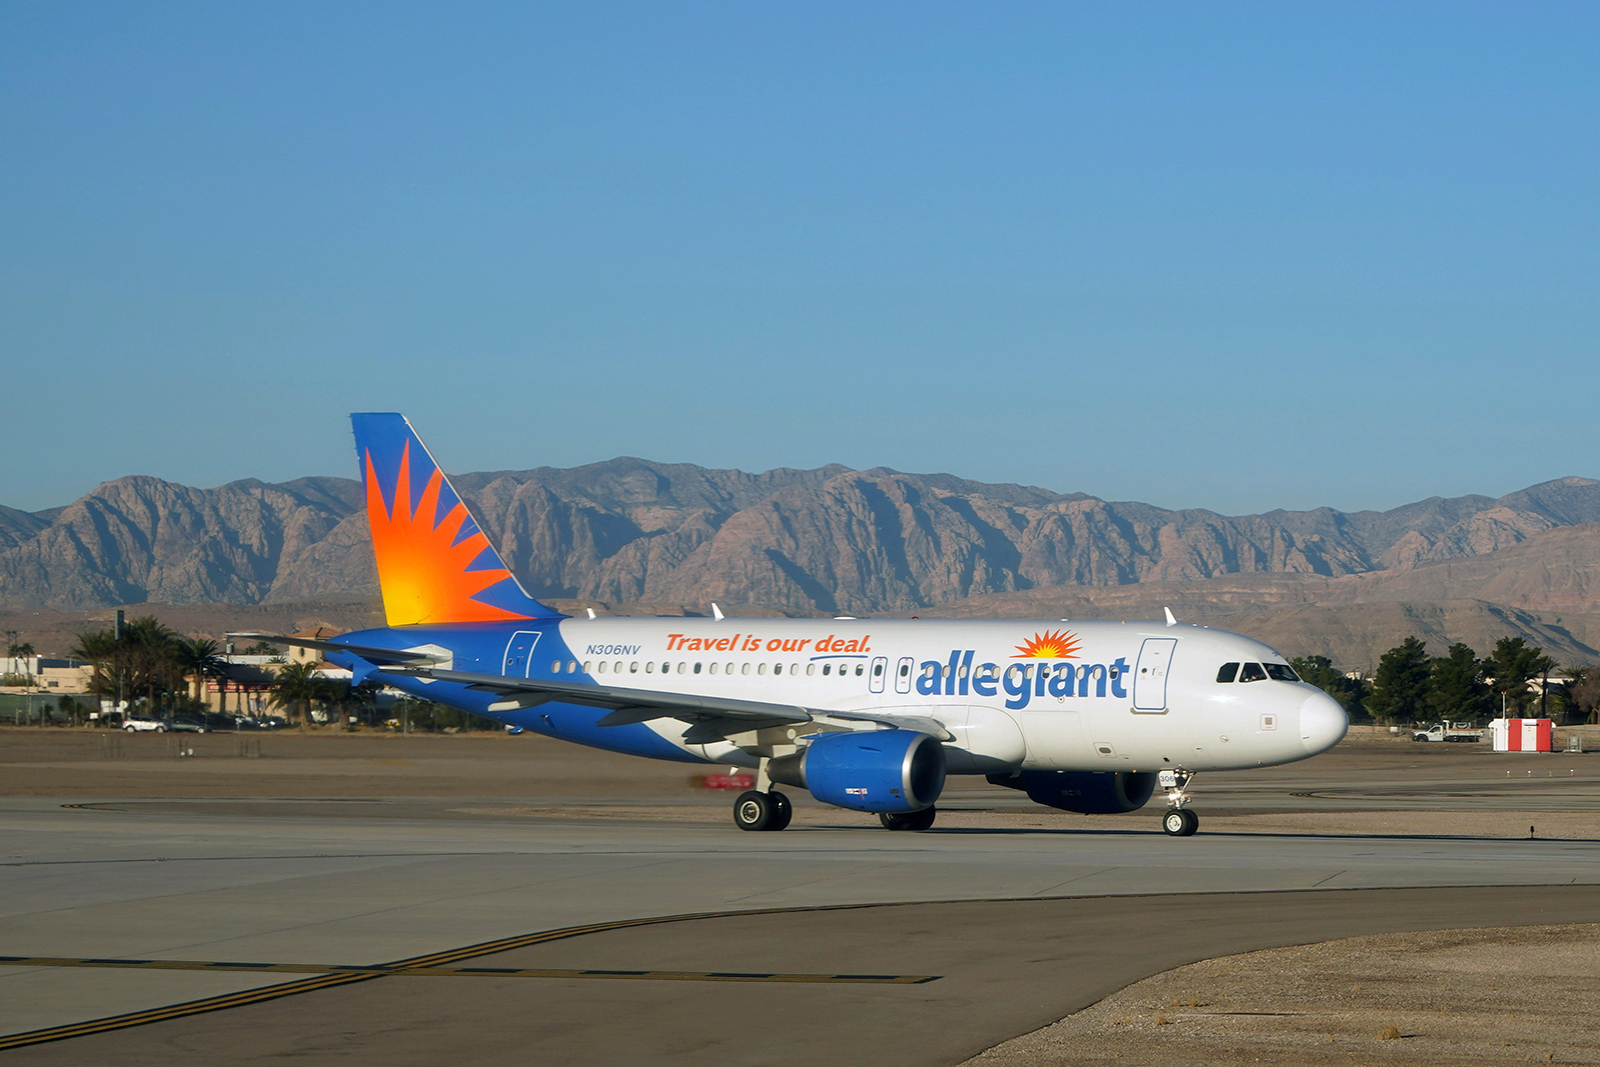 An Allegiant Airlines plane on the runway at McCarran International Airport, on February 14, 2020 in Las Vegas.